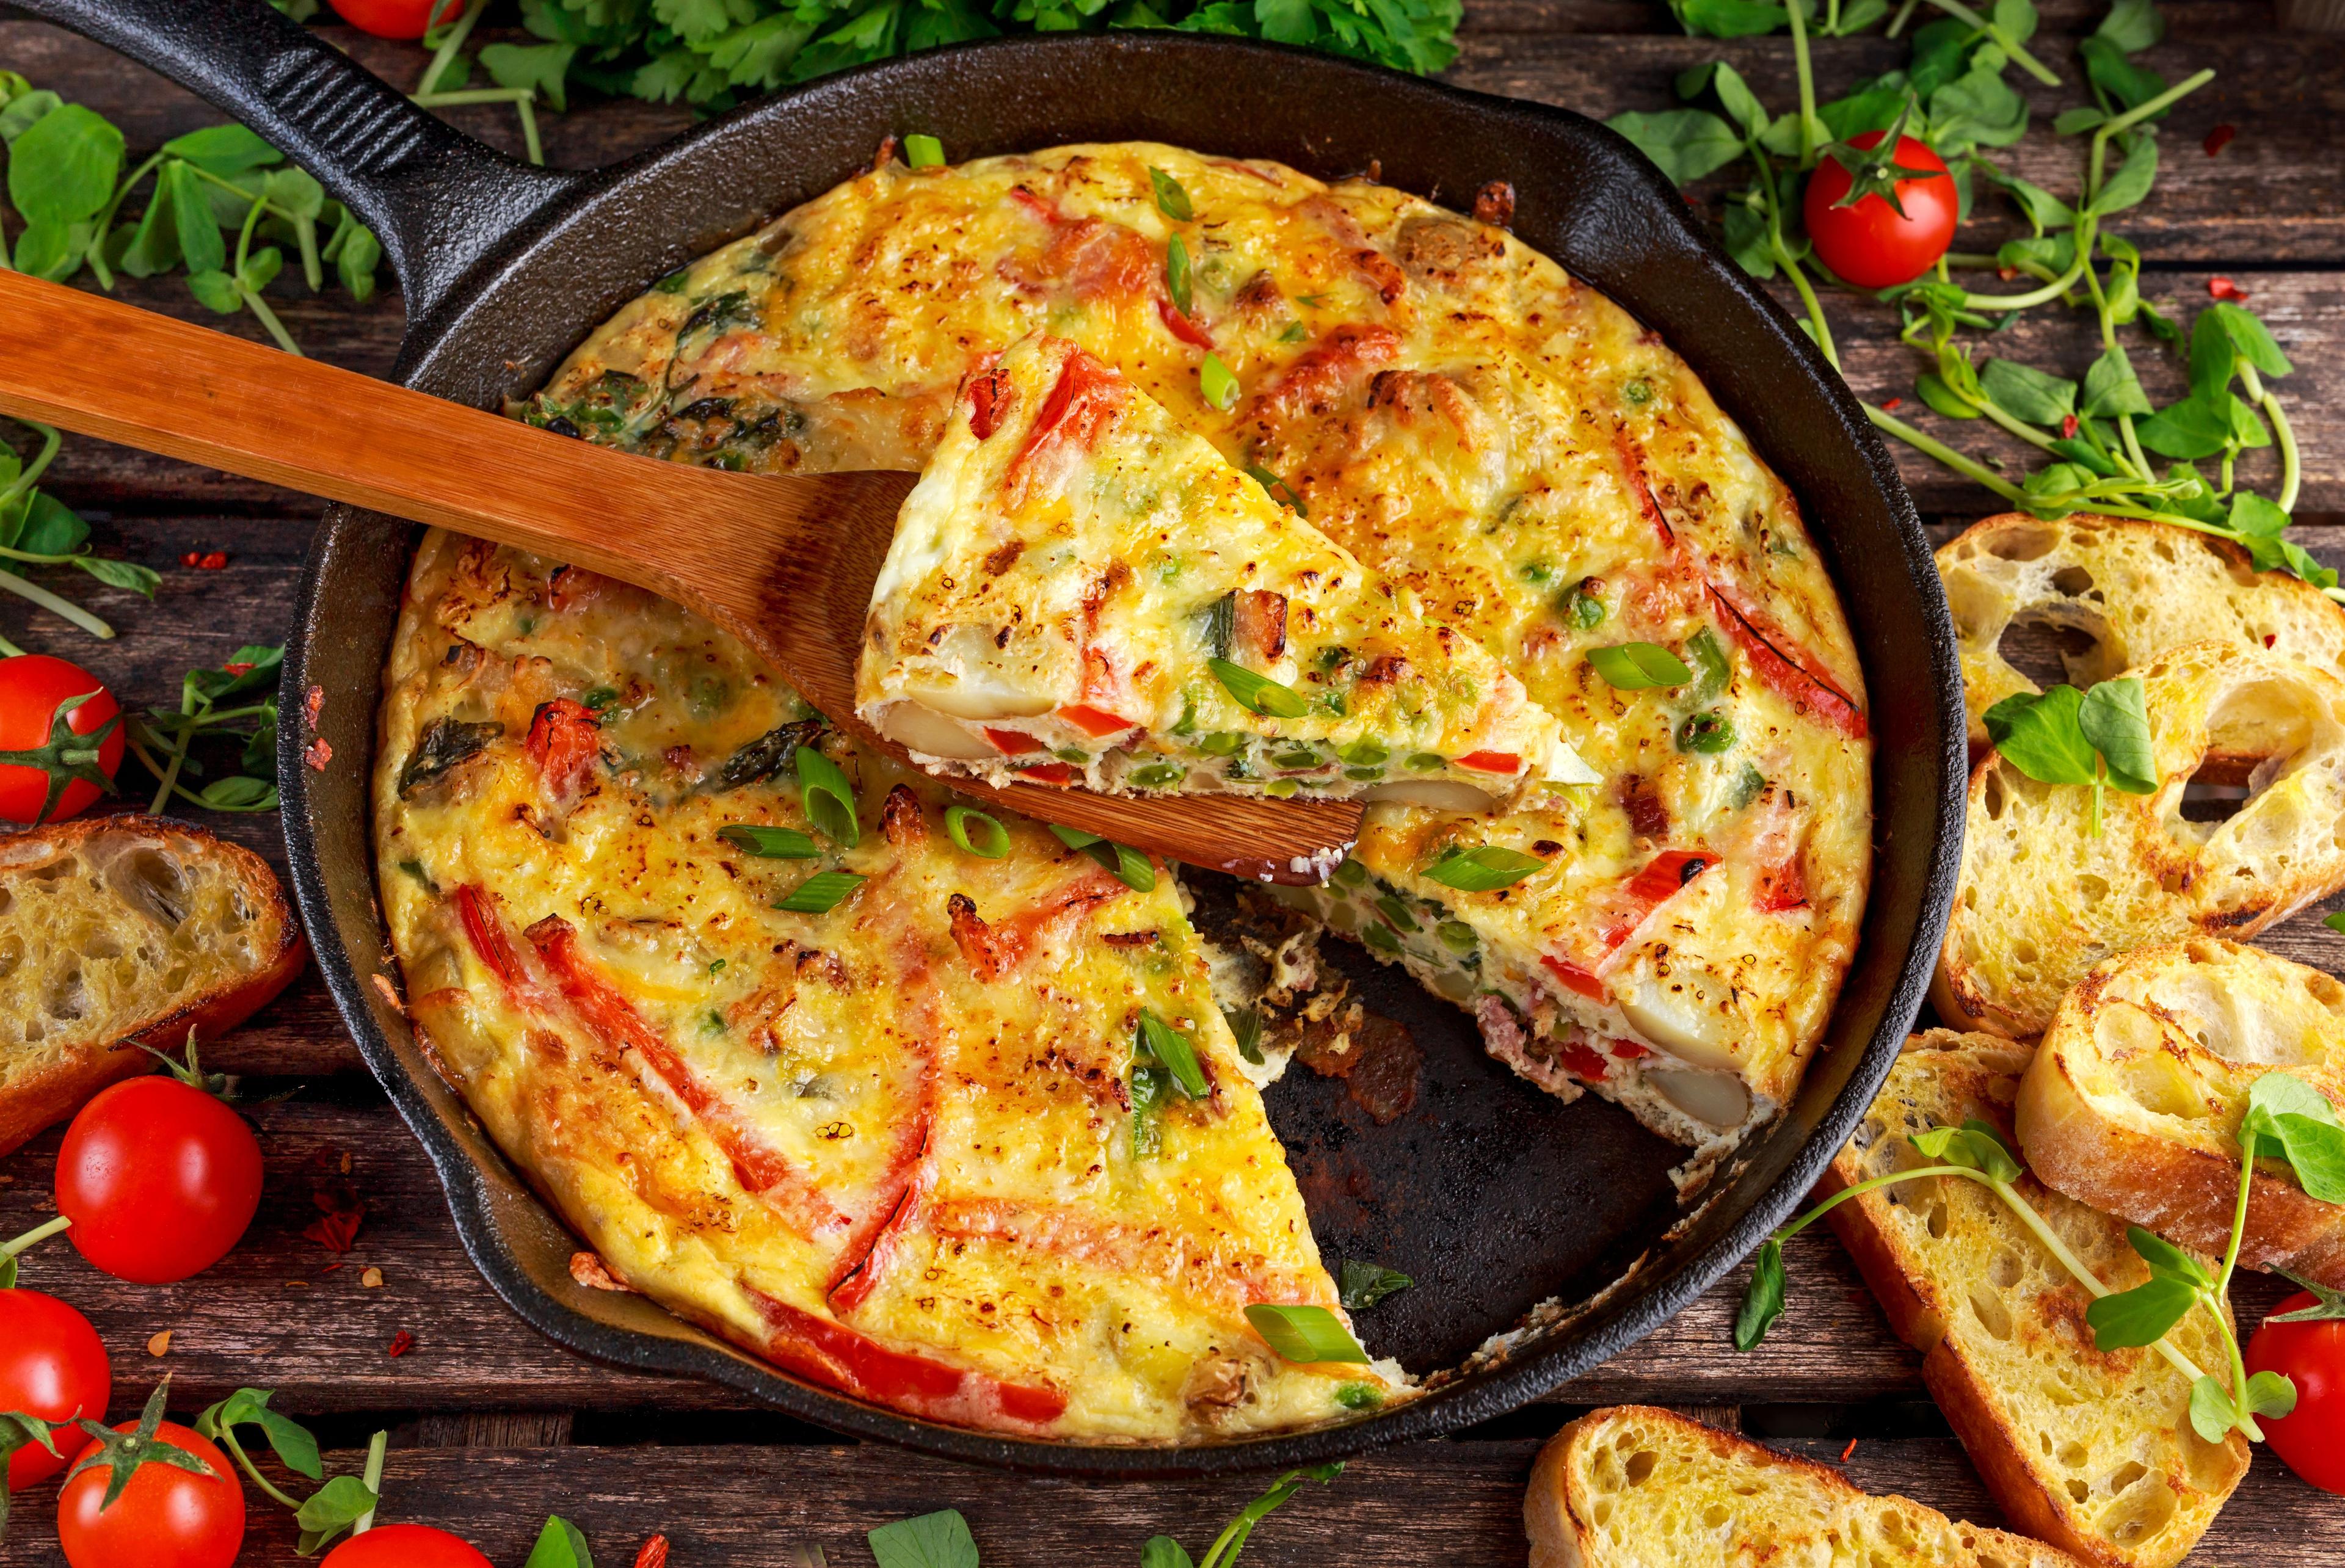 Tortilla with peppers and spicesimage